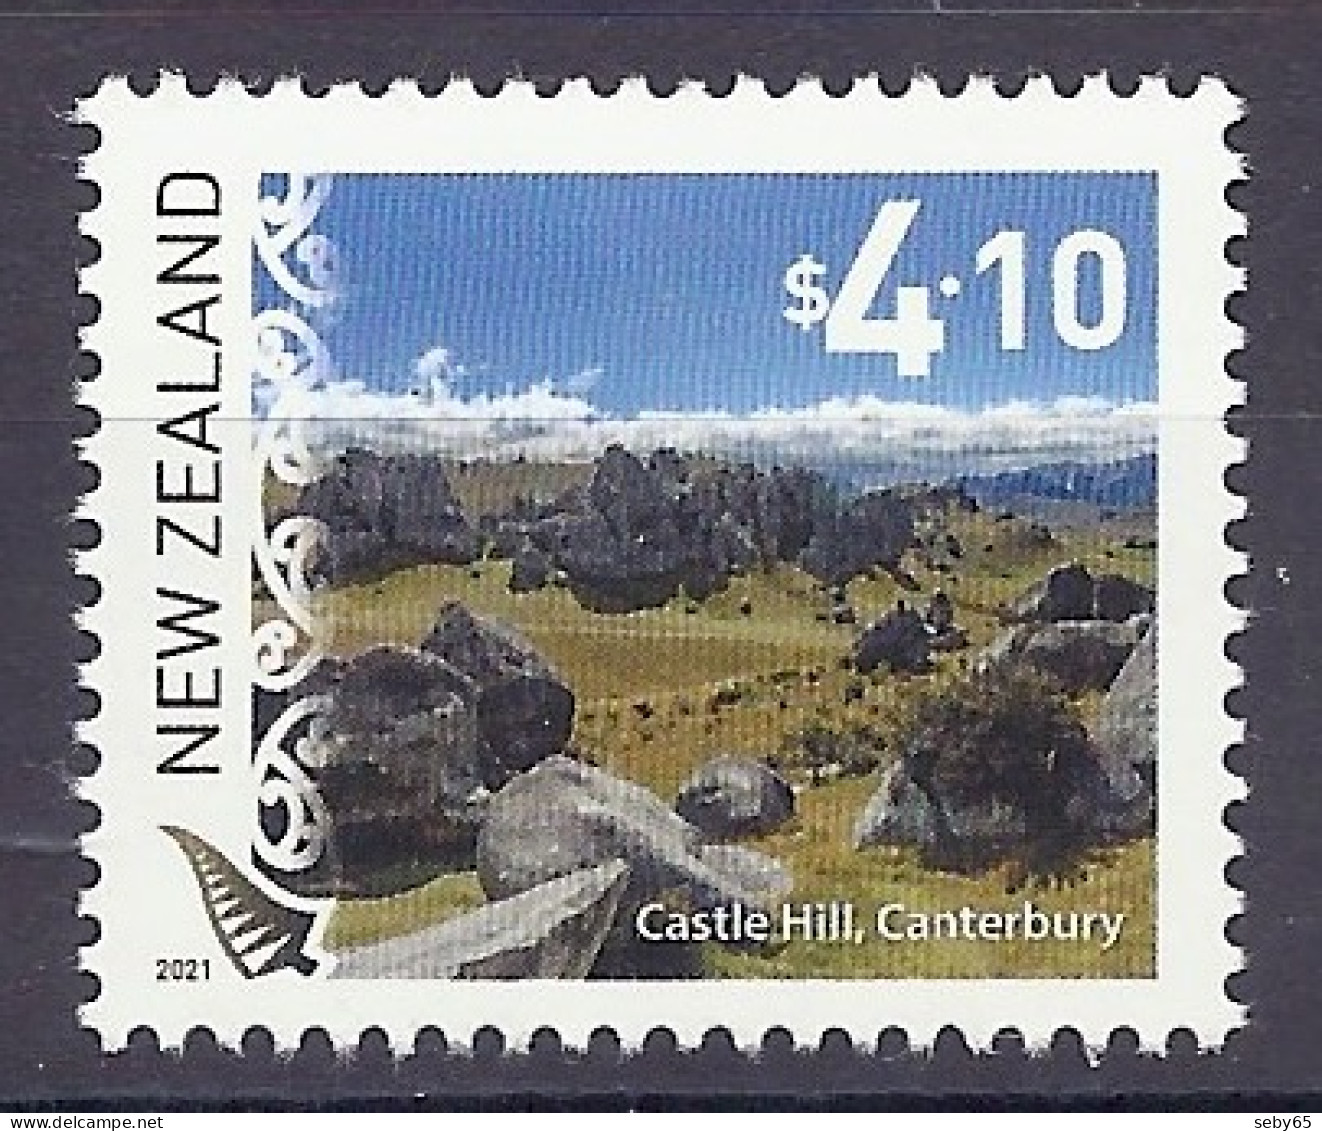 New Zealand 2021 - Definitives, Castle Hill, Canterbury, Scenic Views, Scenery, Mountains, Rocks, Landscapes - MNH - Neufs